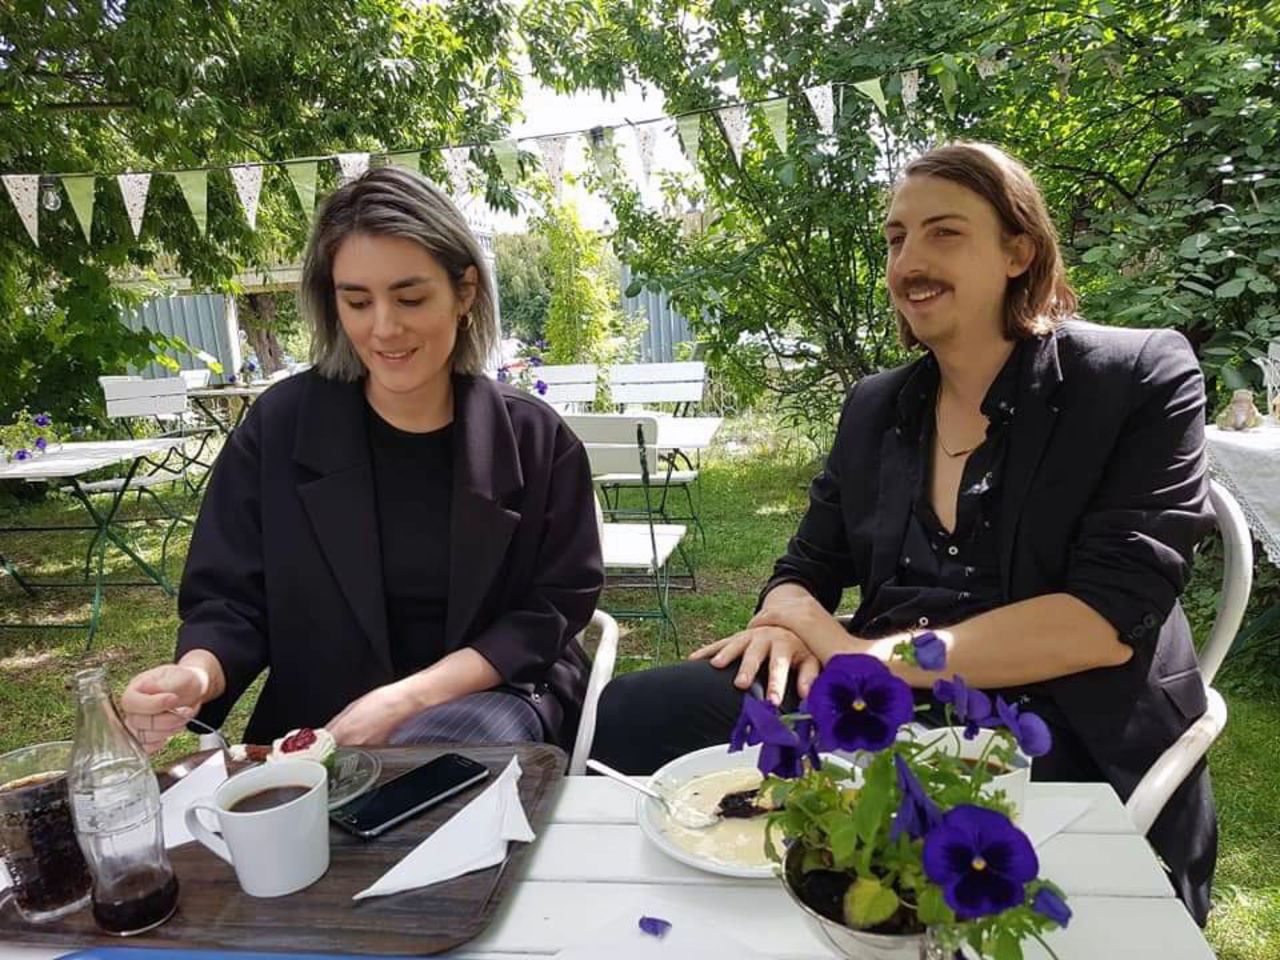 Two people eating cake in a garden.